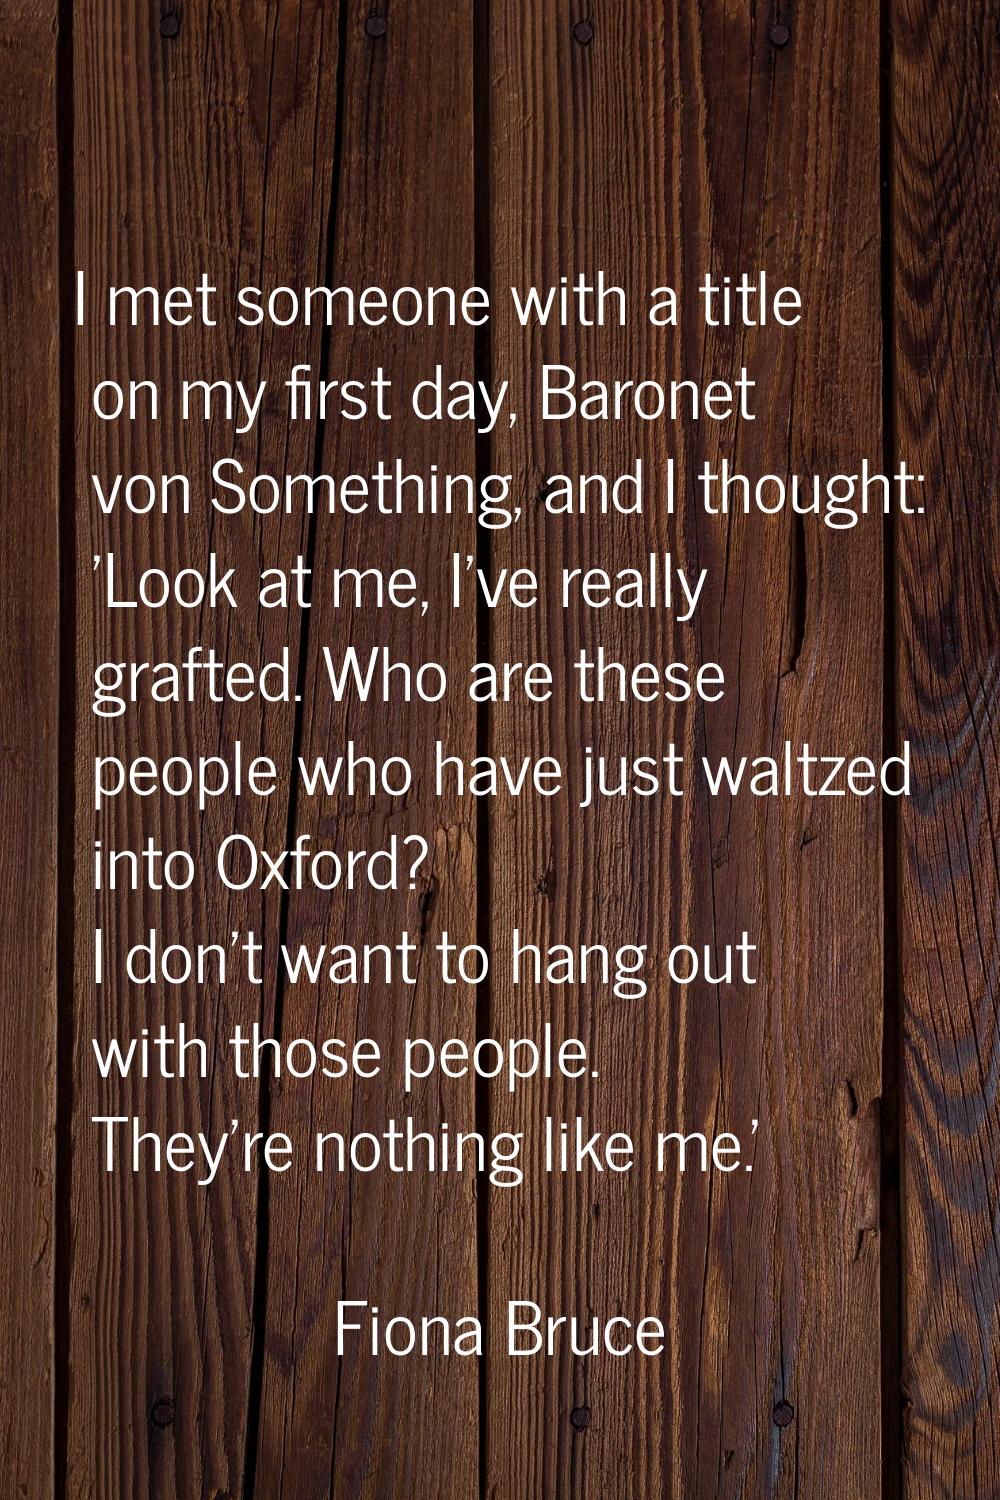 I met someone with a title on my first day, Baronet von Something, and I thought: 'Look at me, I've